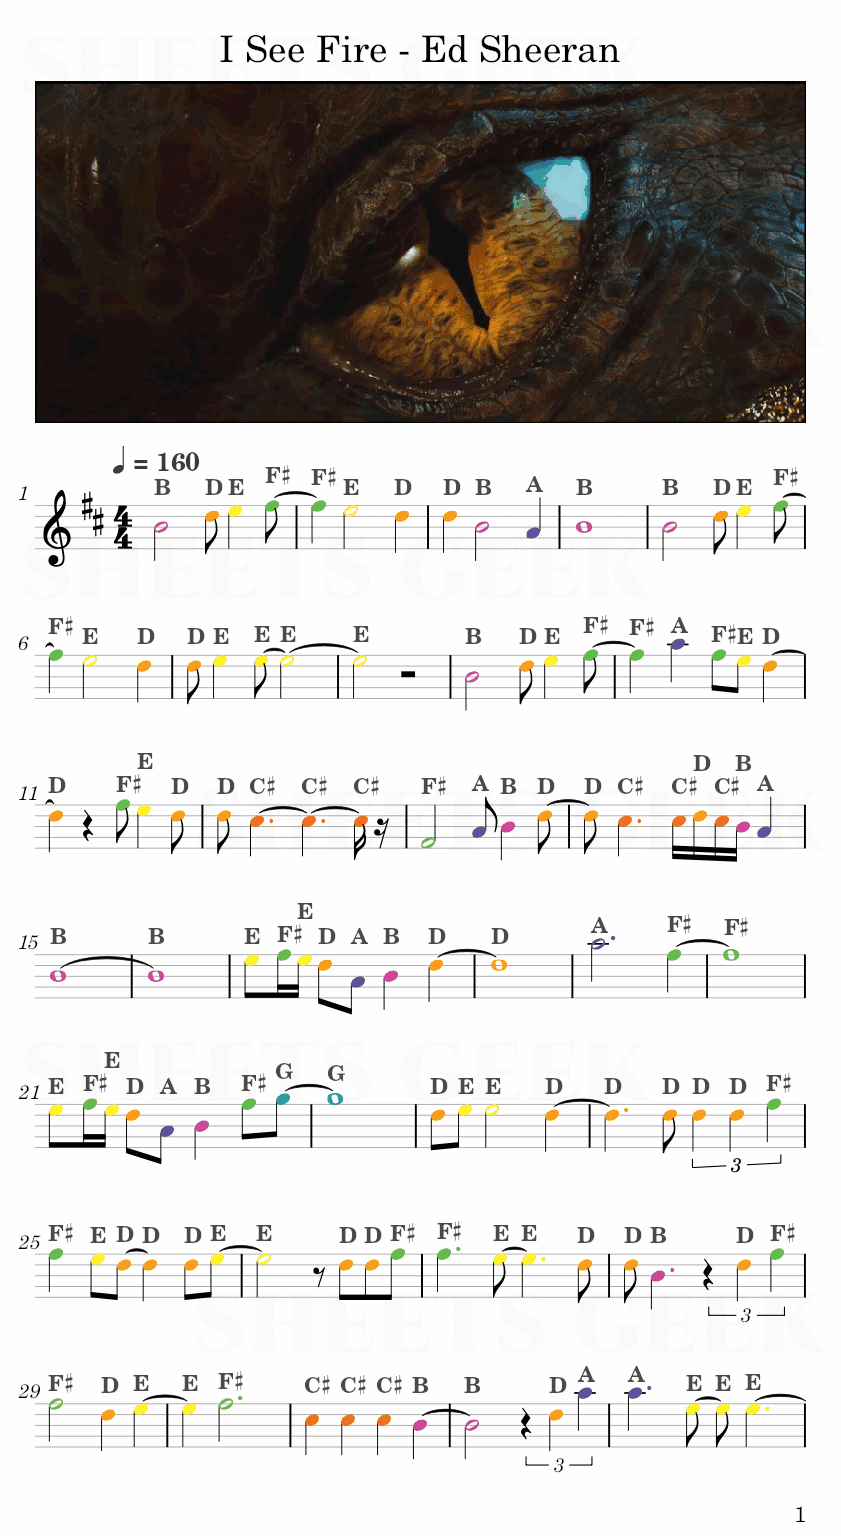 I See Fire - Ed Sheeran (The Hobbit) Easy Sheet Music Free for piano, keyboard, flute, violin, sax, cello page 1